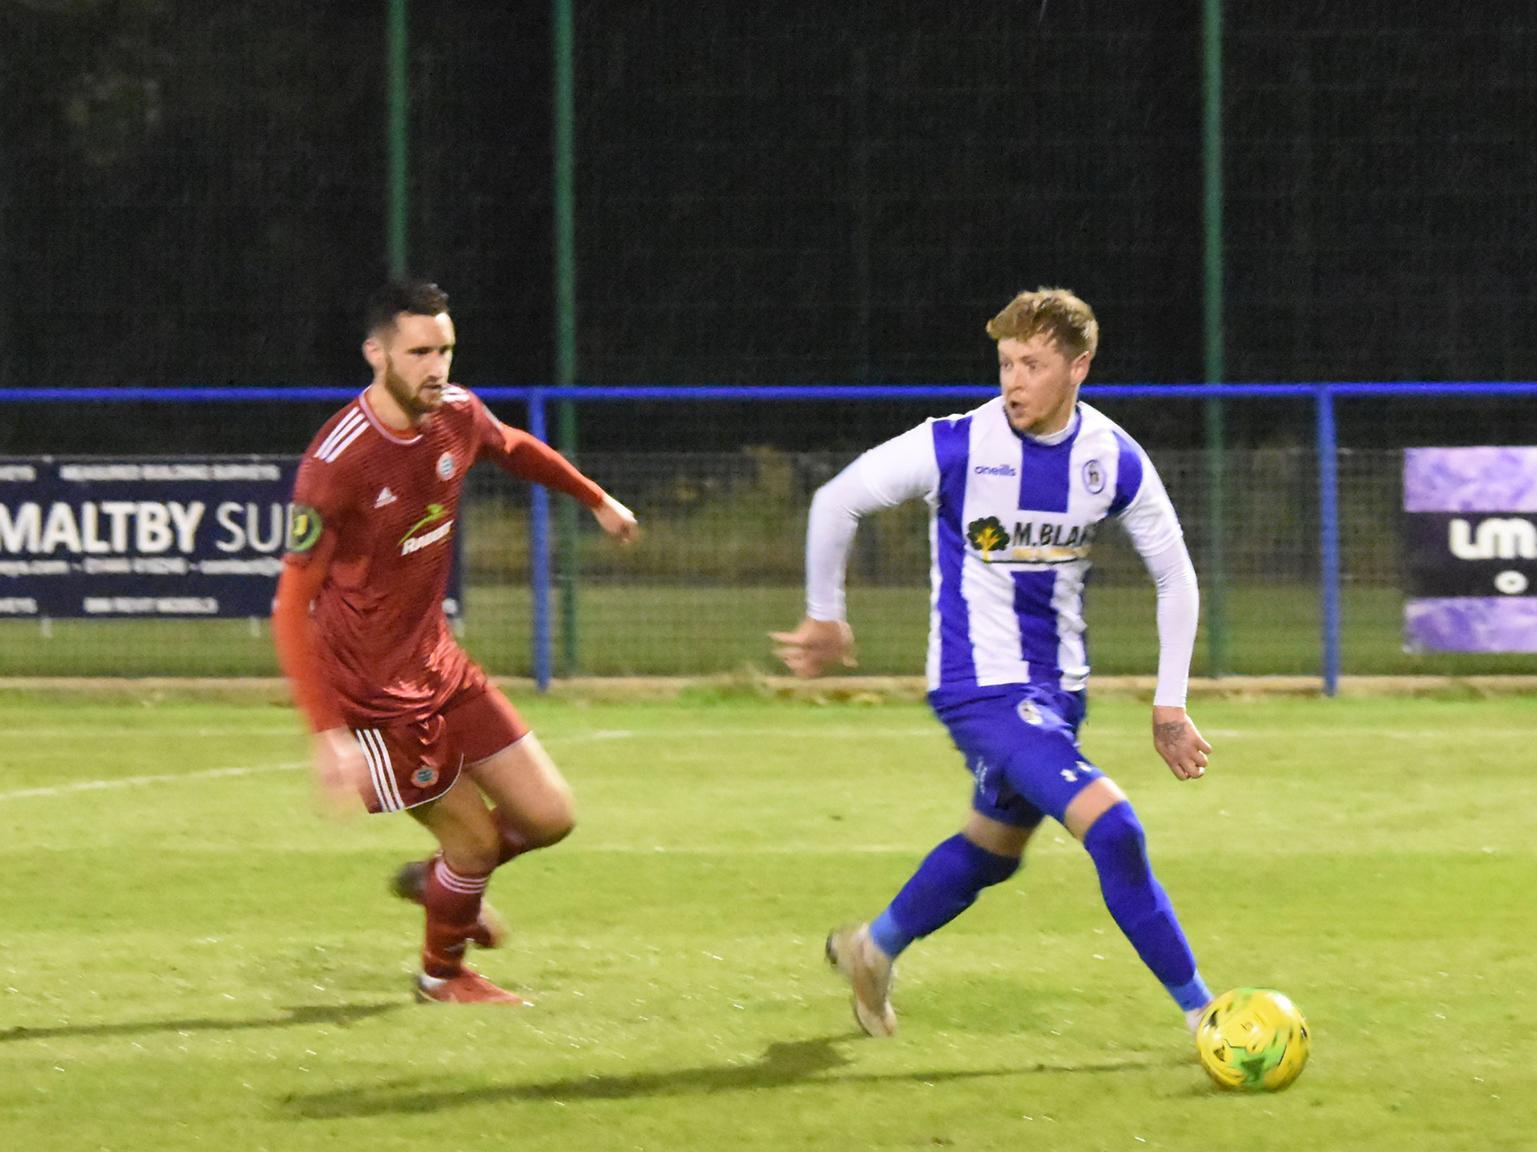 Callum Saunders turns away from a defender.